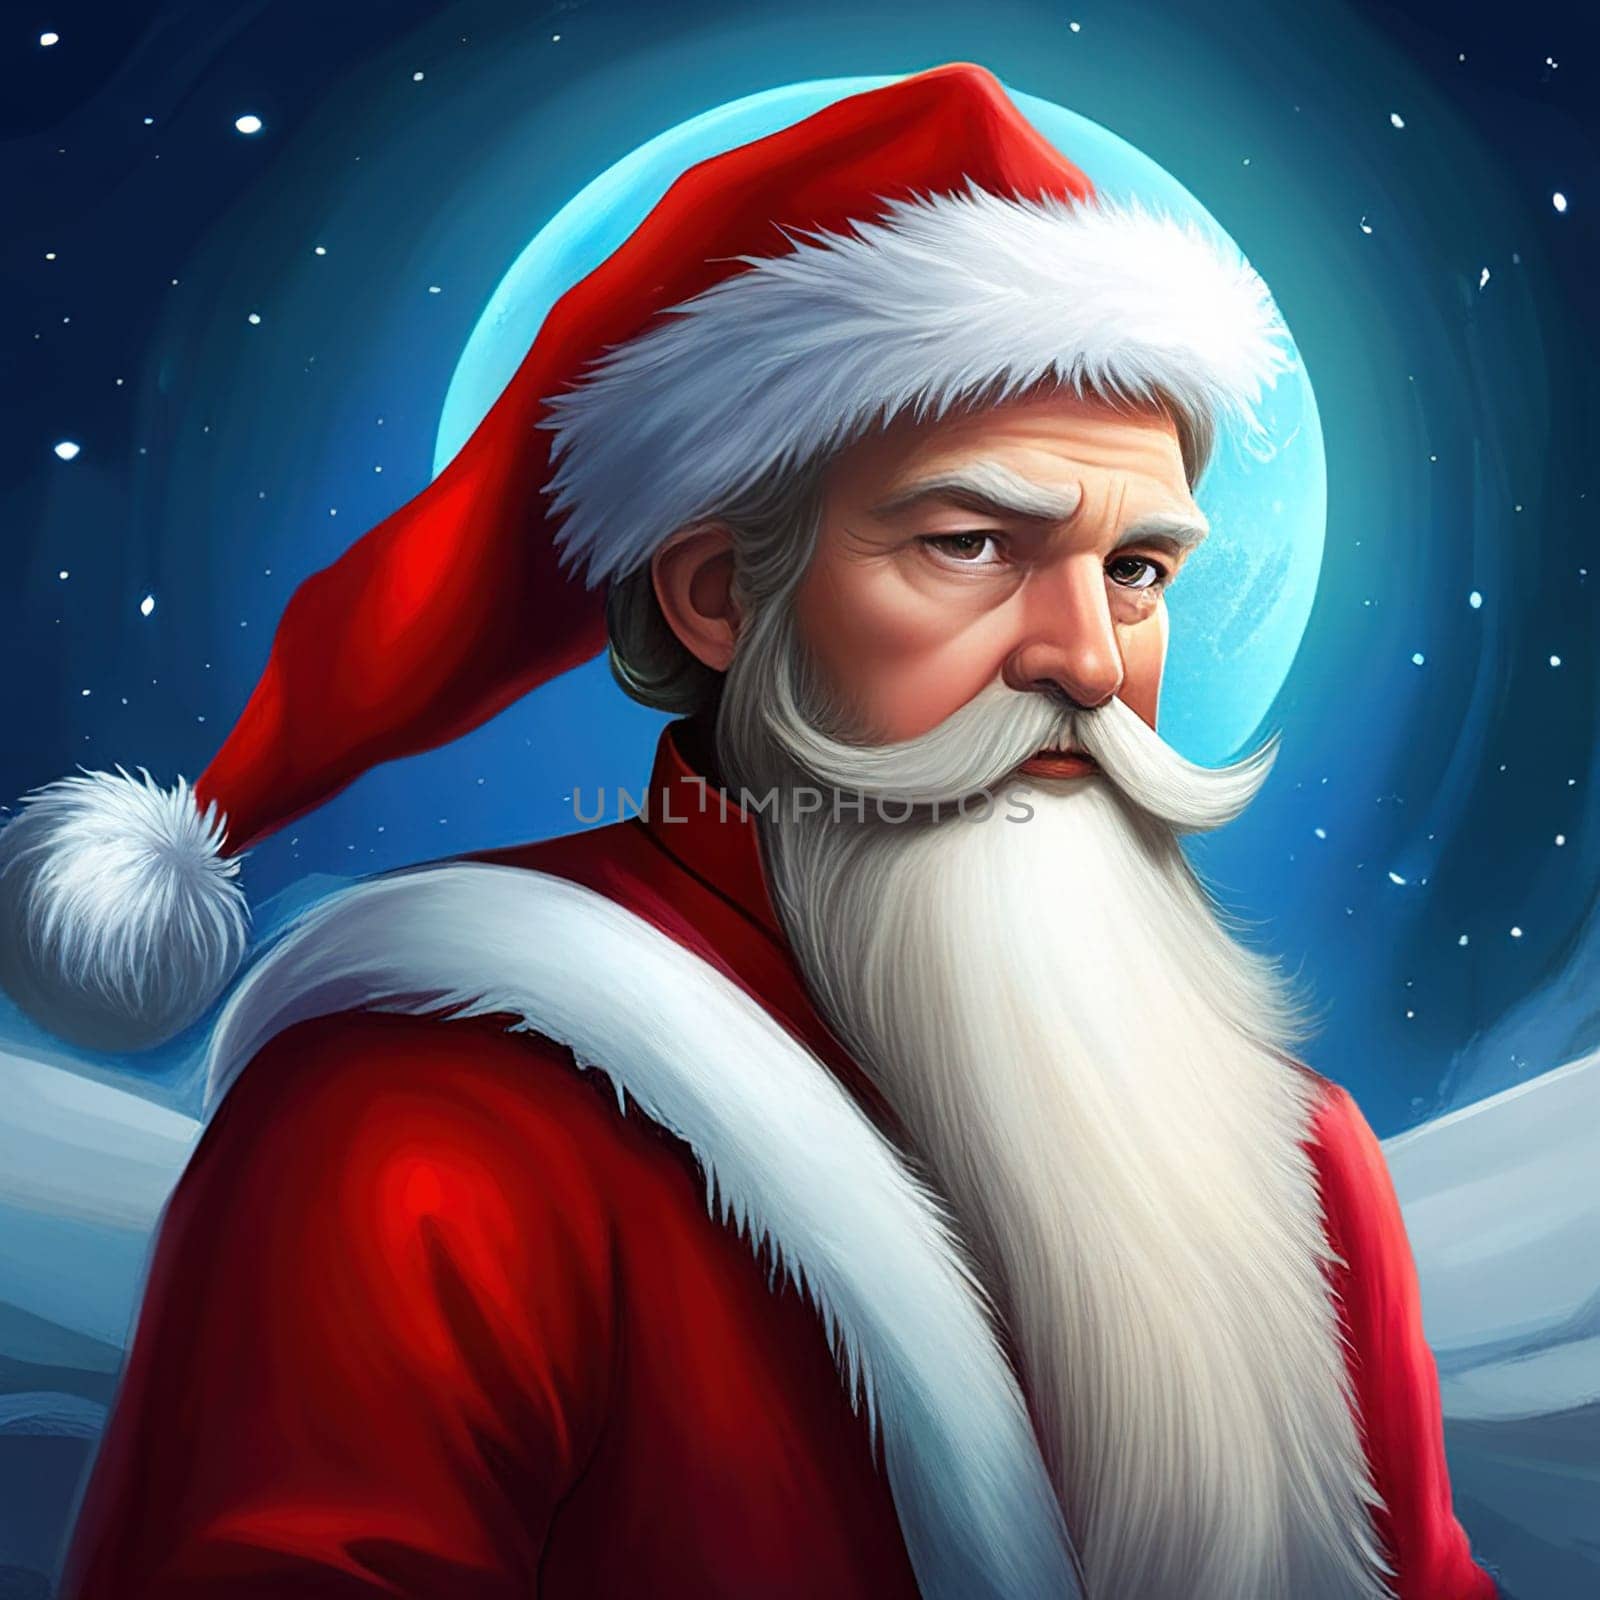 Cartoon Christmas illustration Funny happy Santa Claus character with gift, bag with presents. For Christmas cards, banners, tags and labels.